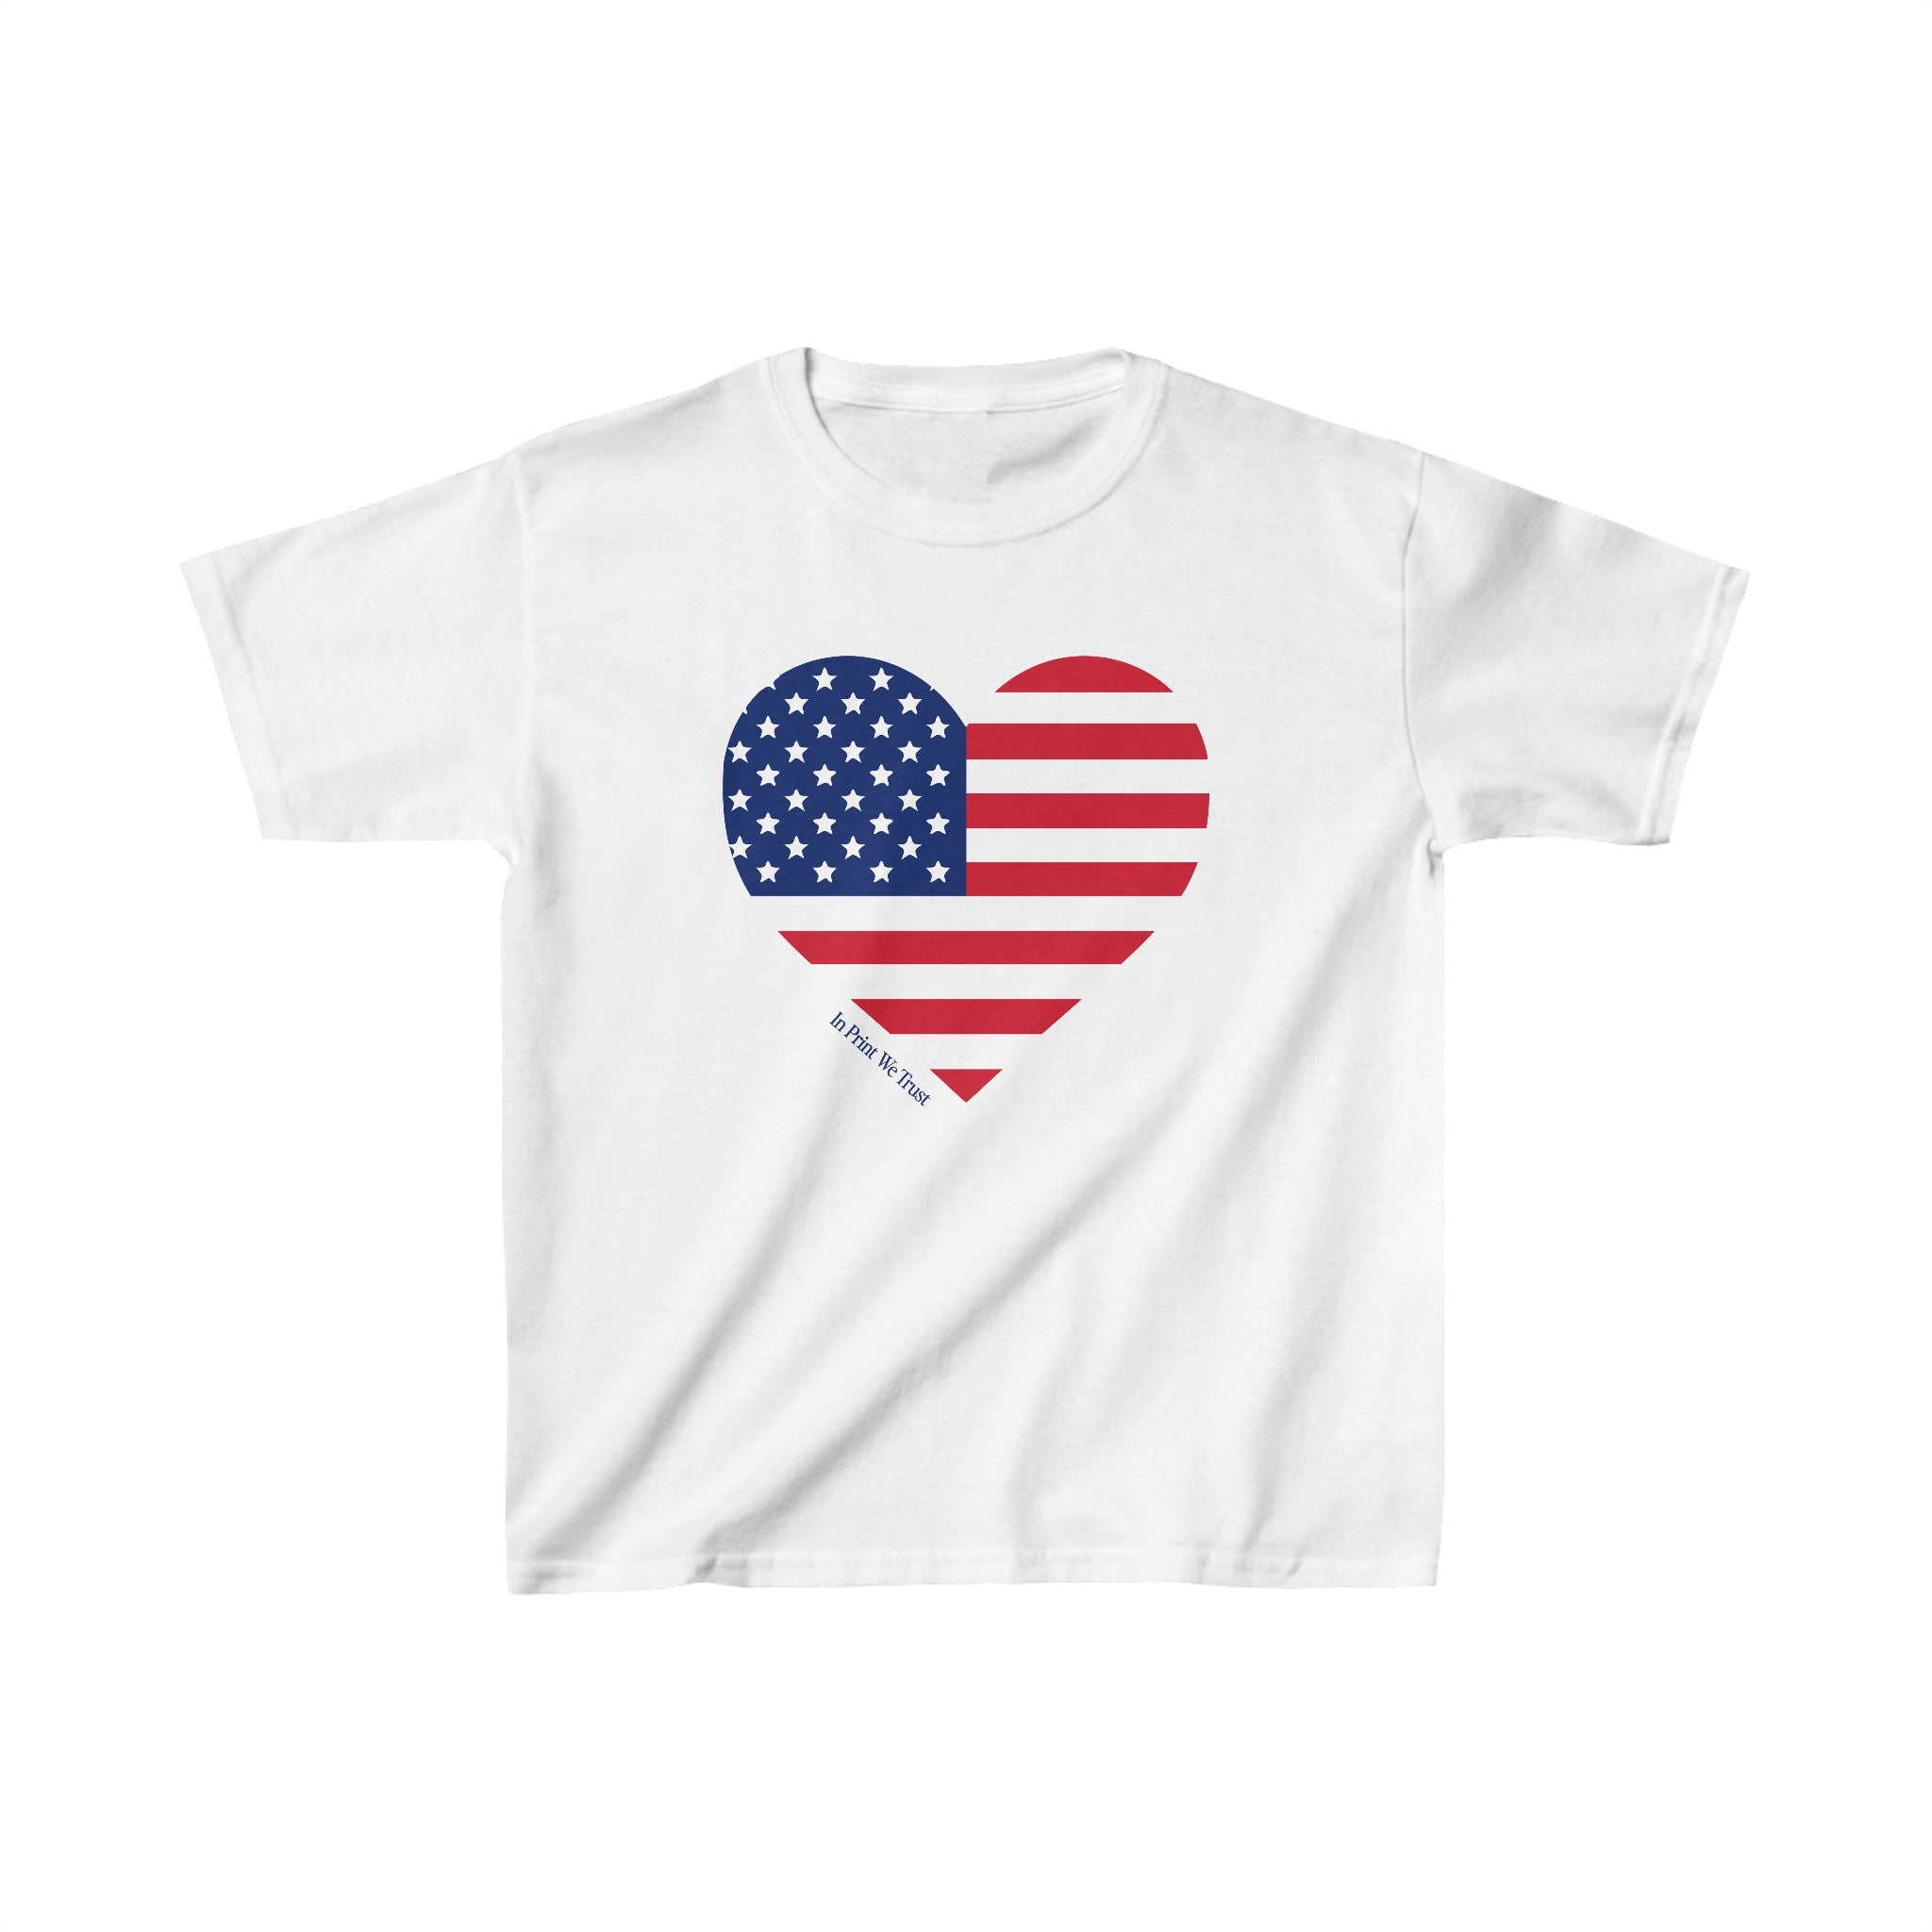 'United States' baby tee - In Print We Trust